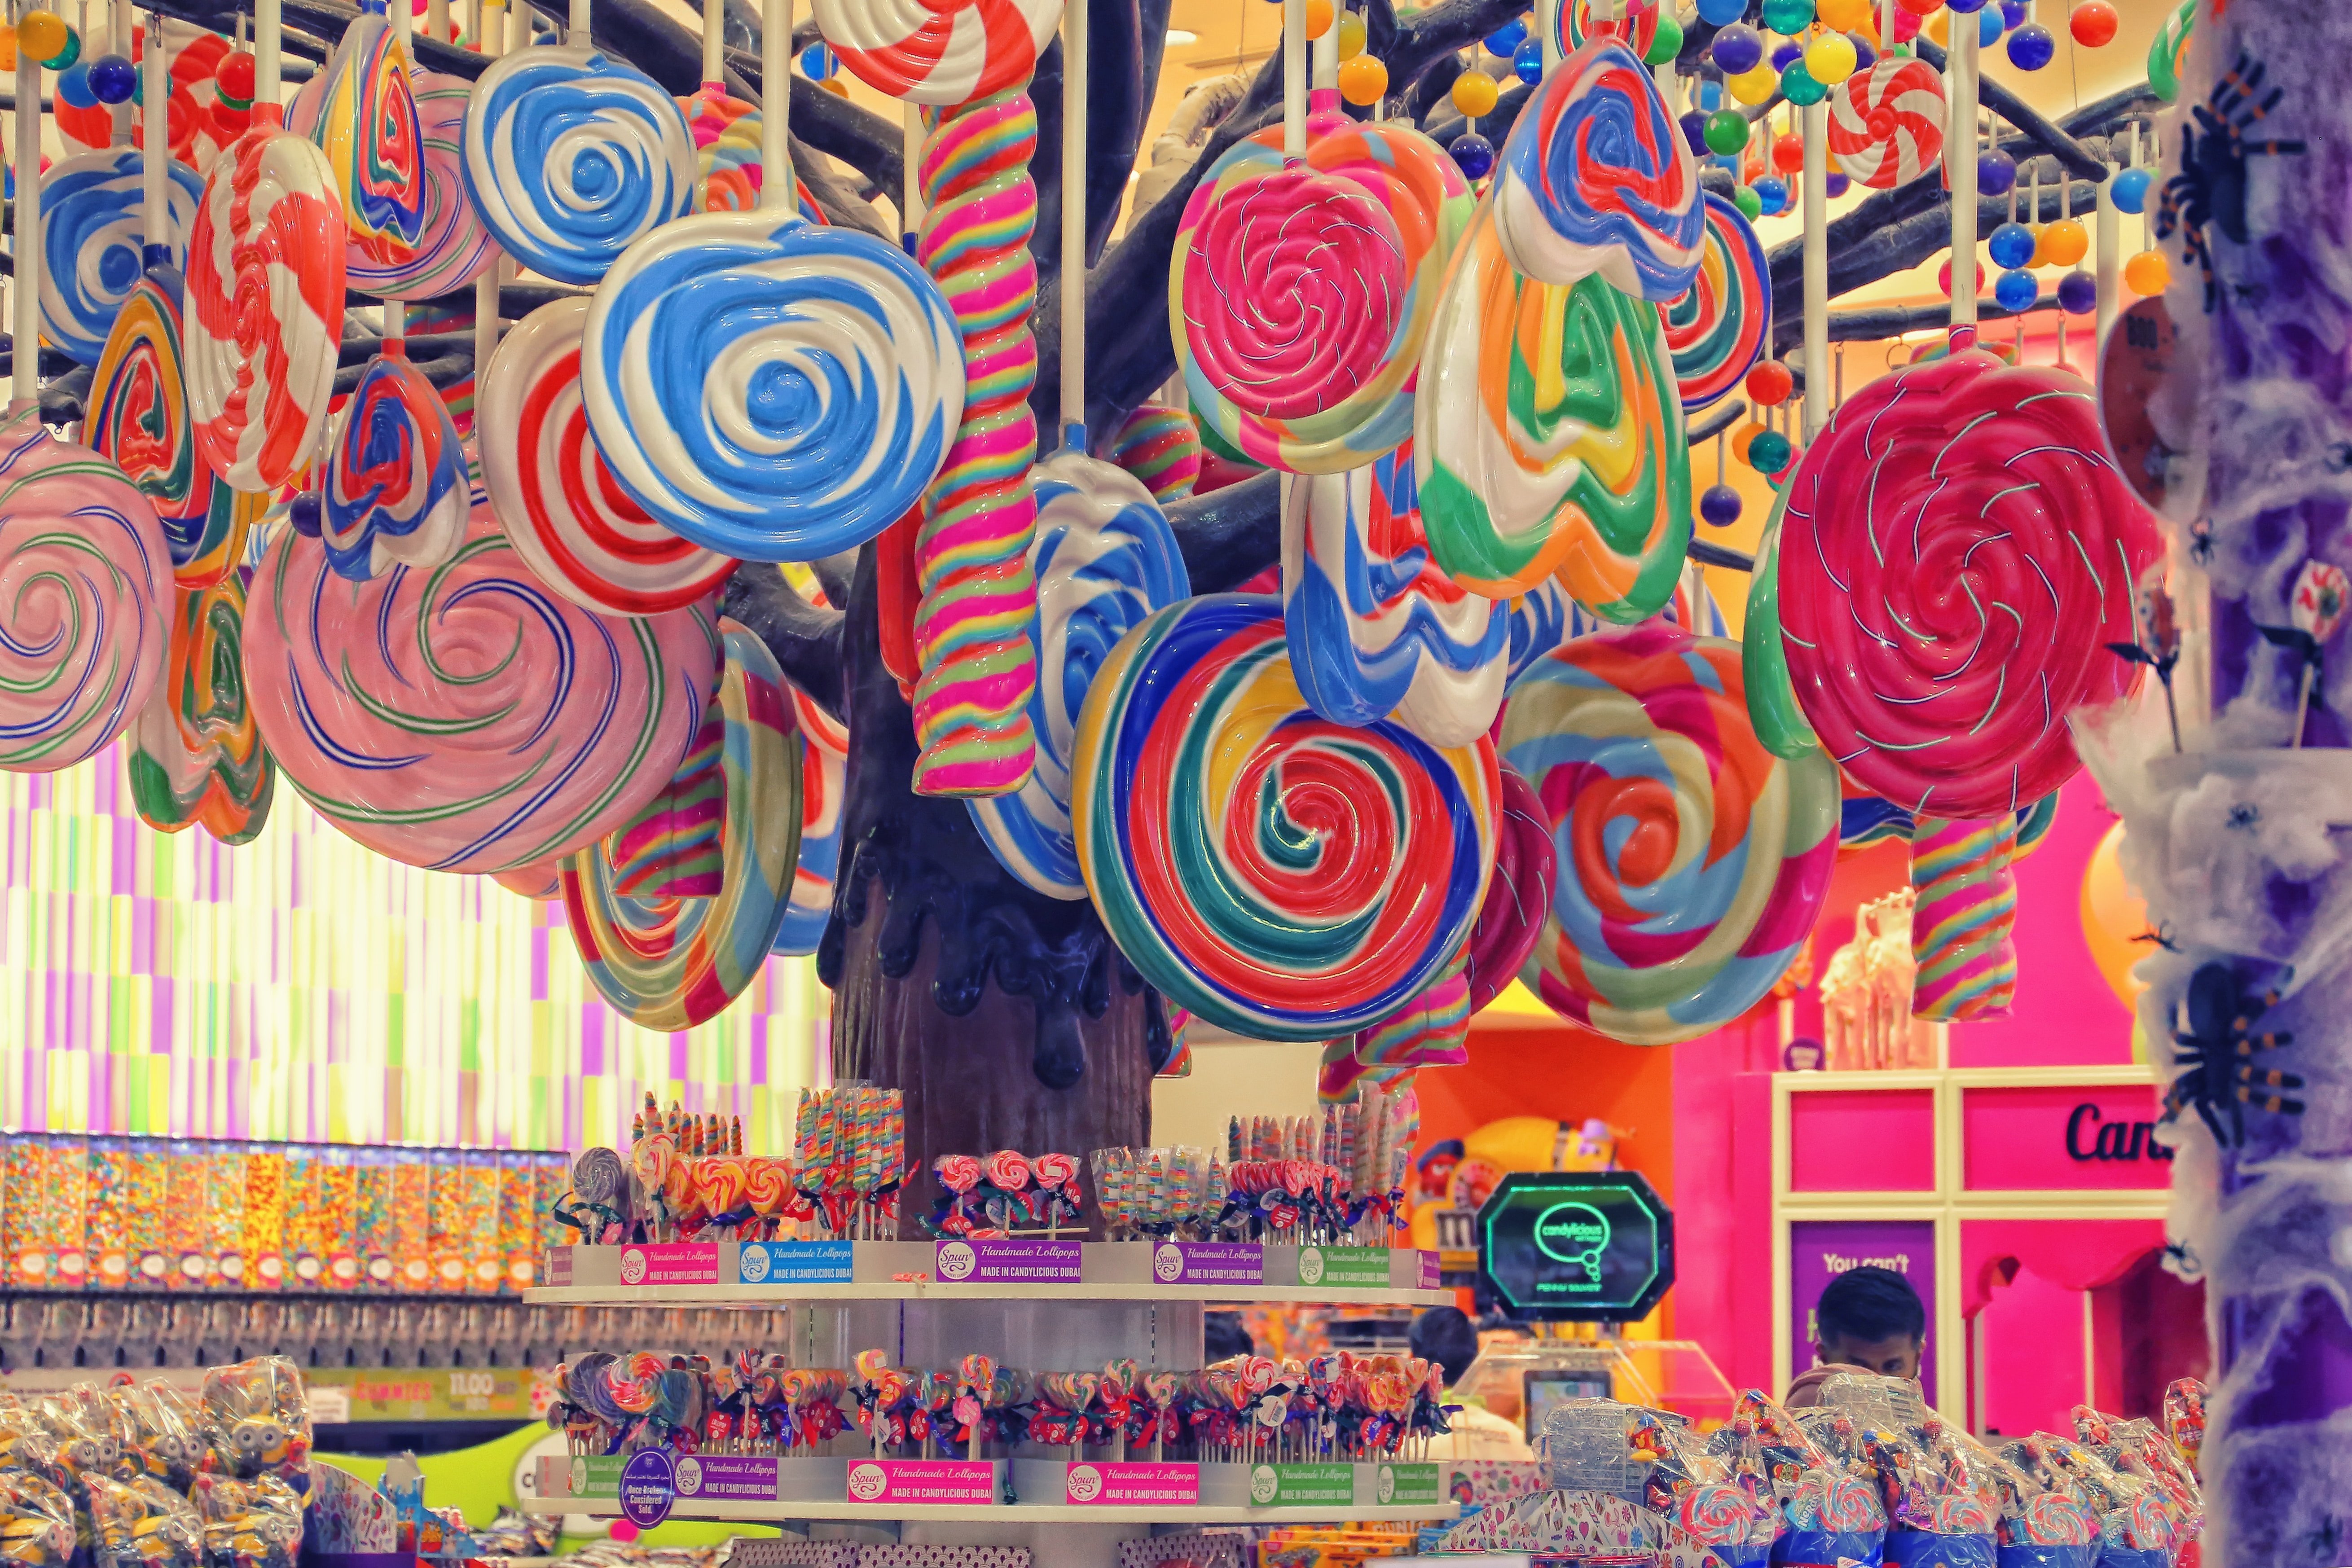 An assortment of sweets in a candy shop. | Source: Unsplash